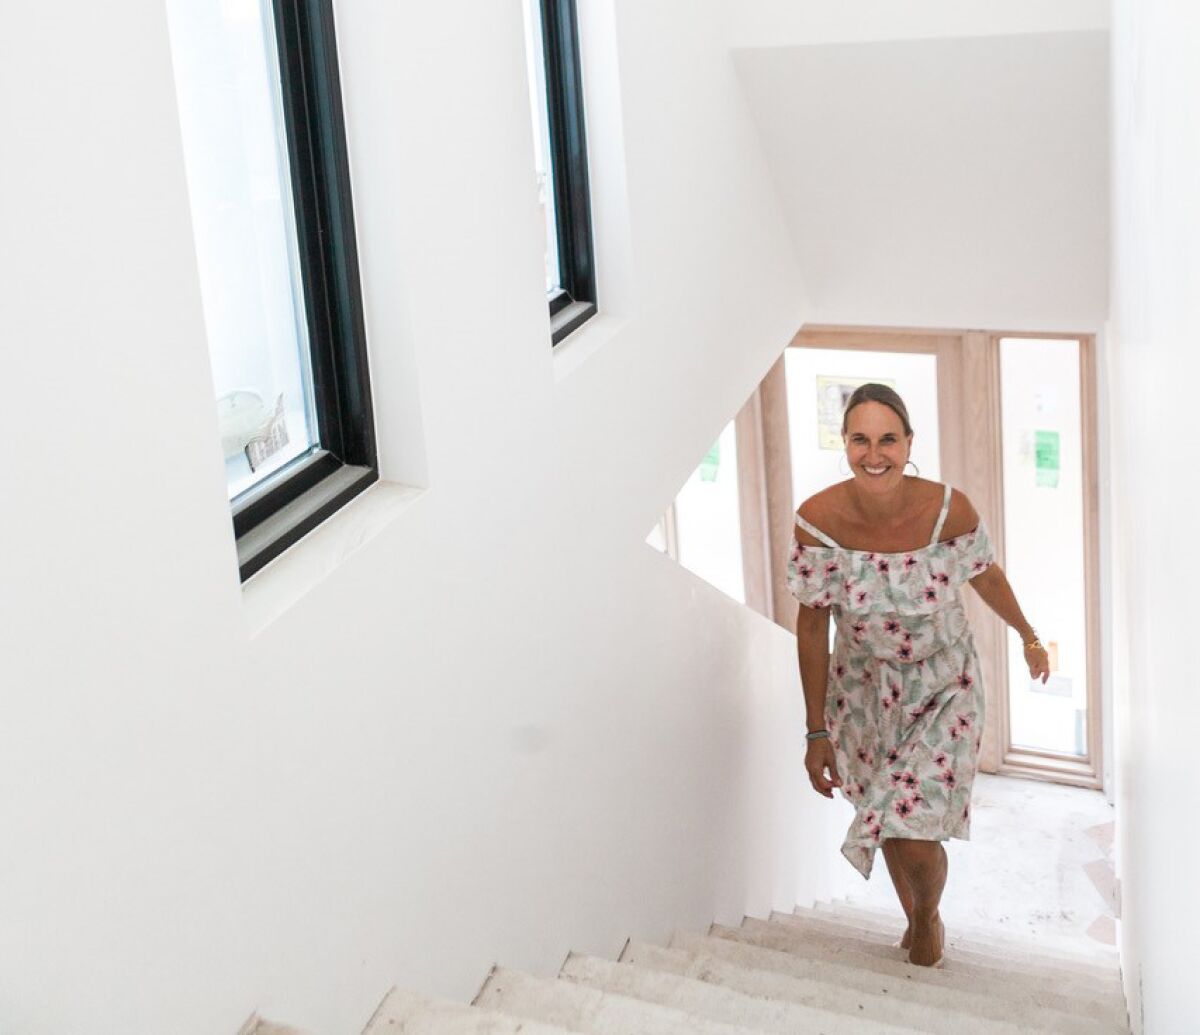 Designer and B&B owner Anke Bodack on the stairs of the Twelve Senses Retreat.